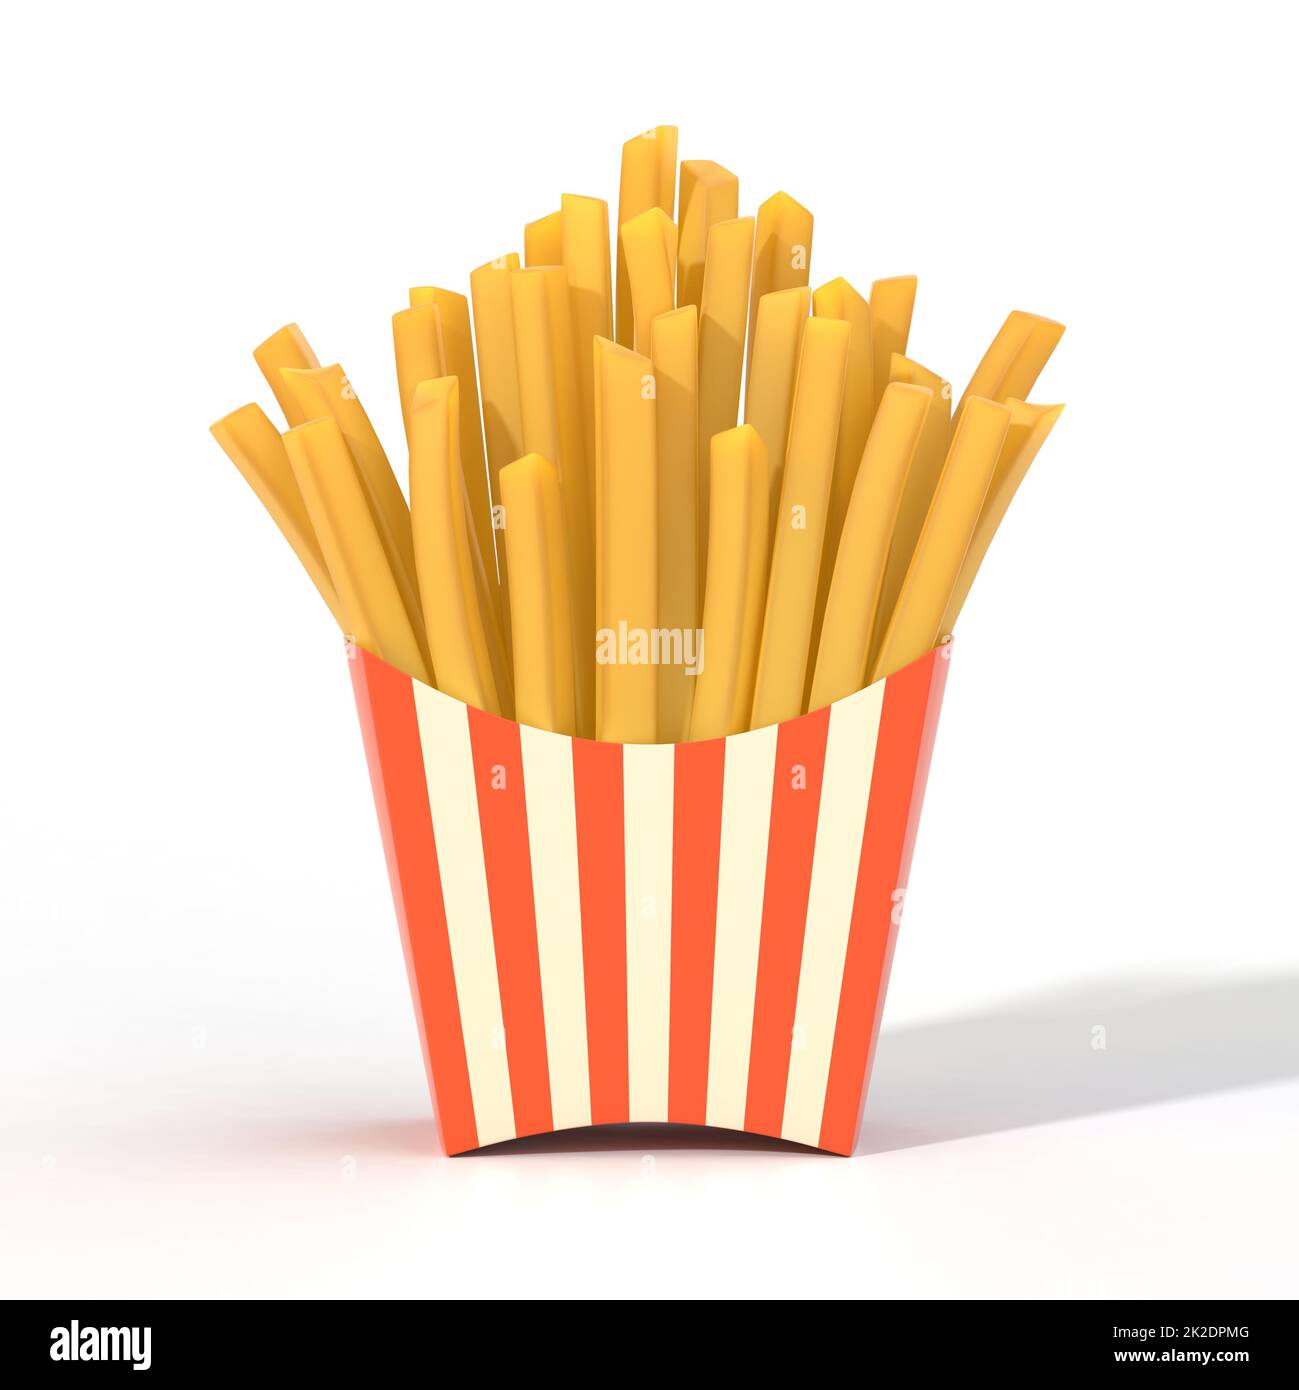 French fries in yellow packaging Stock Photo by ©przemekklos 9353548